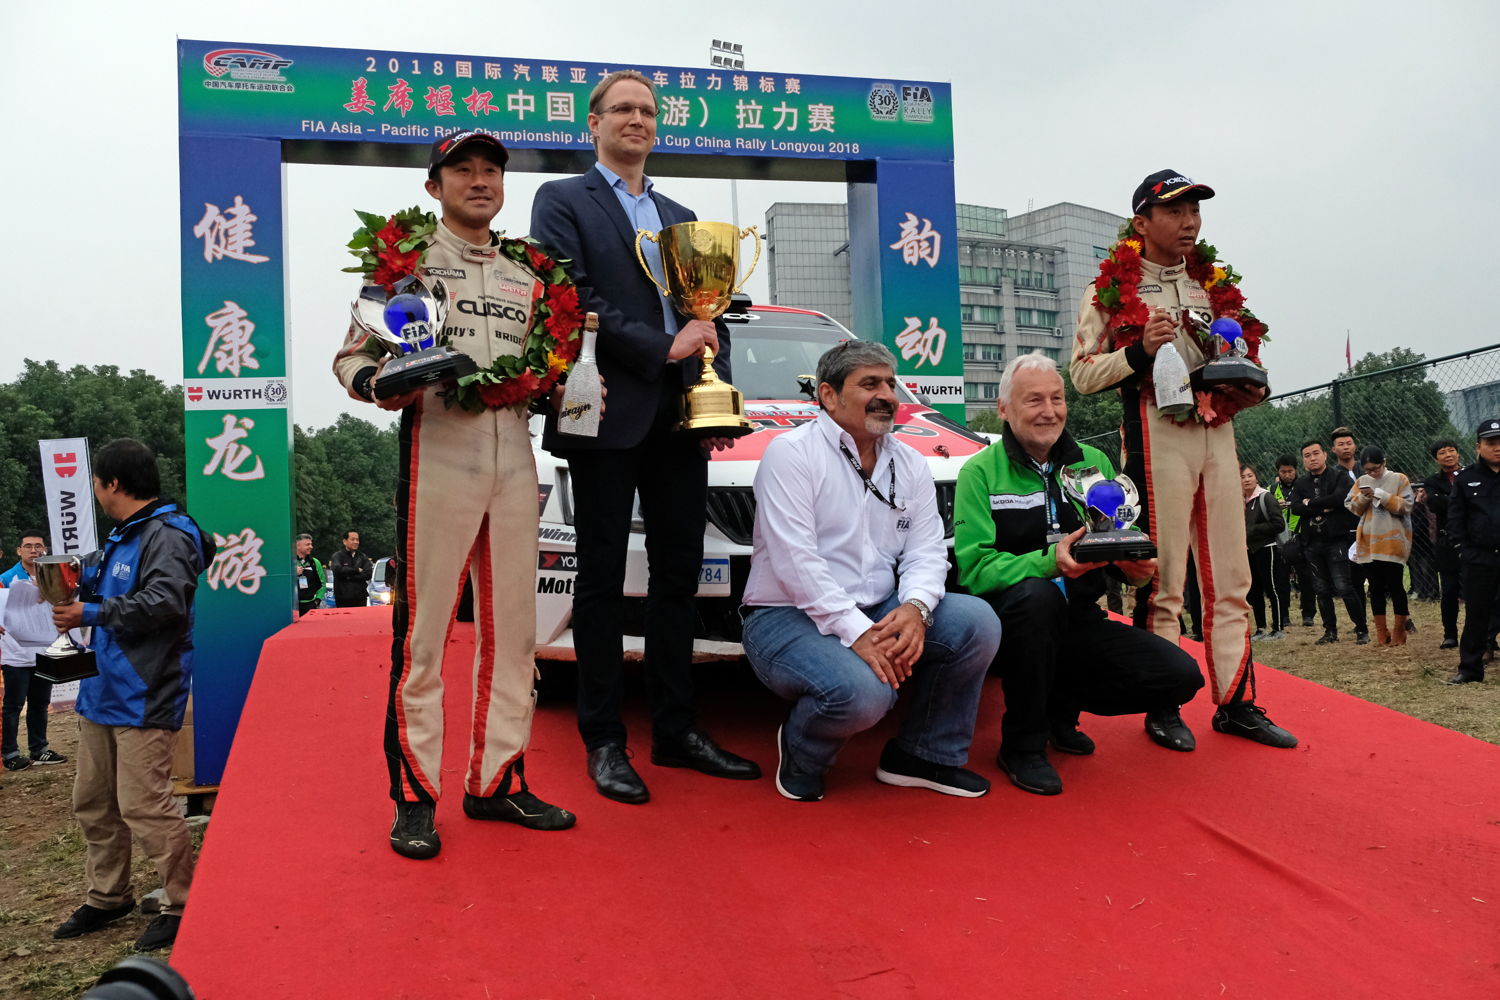 Yuya Sumiyama and Takahiro Yasui secured for ŠKODA
the seventh manufacturer title of the FIA Asia-Pacific Rally
Championship (APRC) in a row